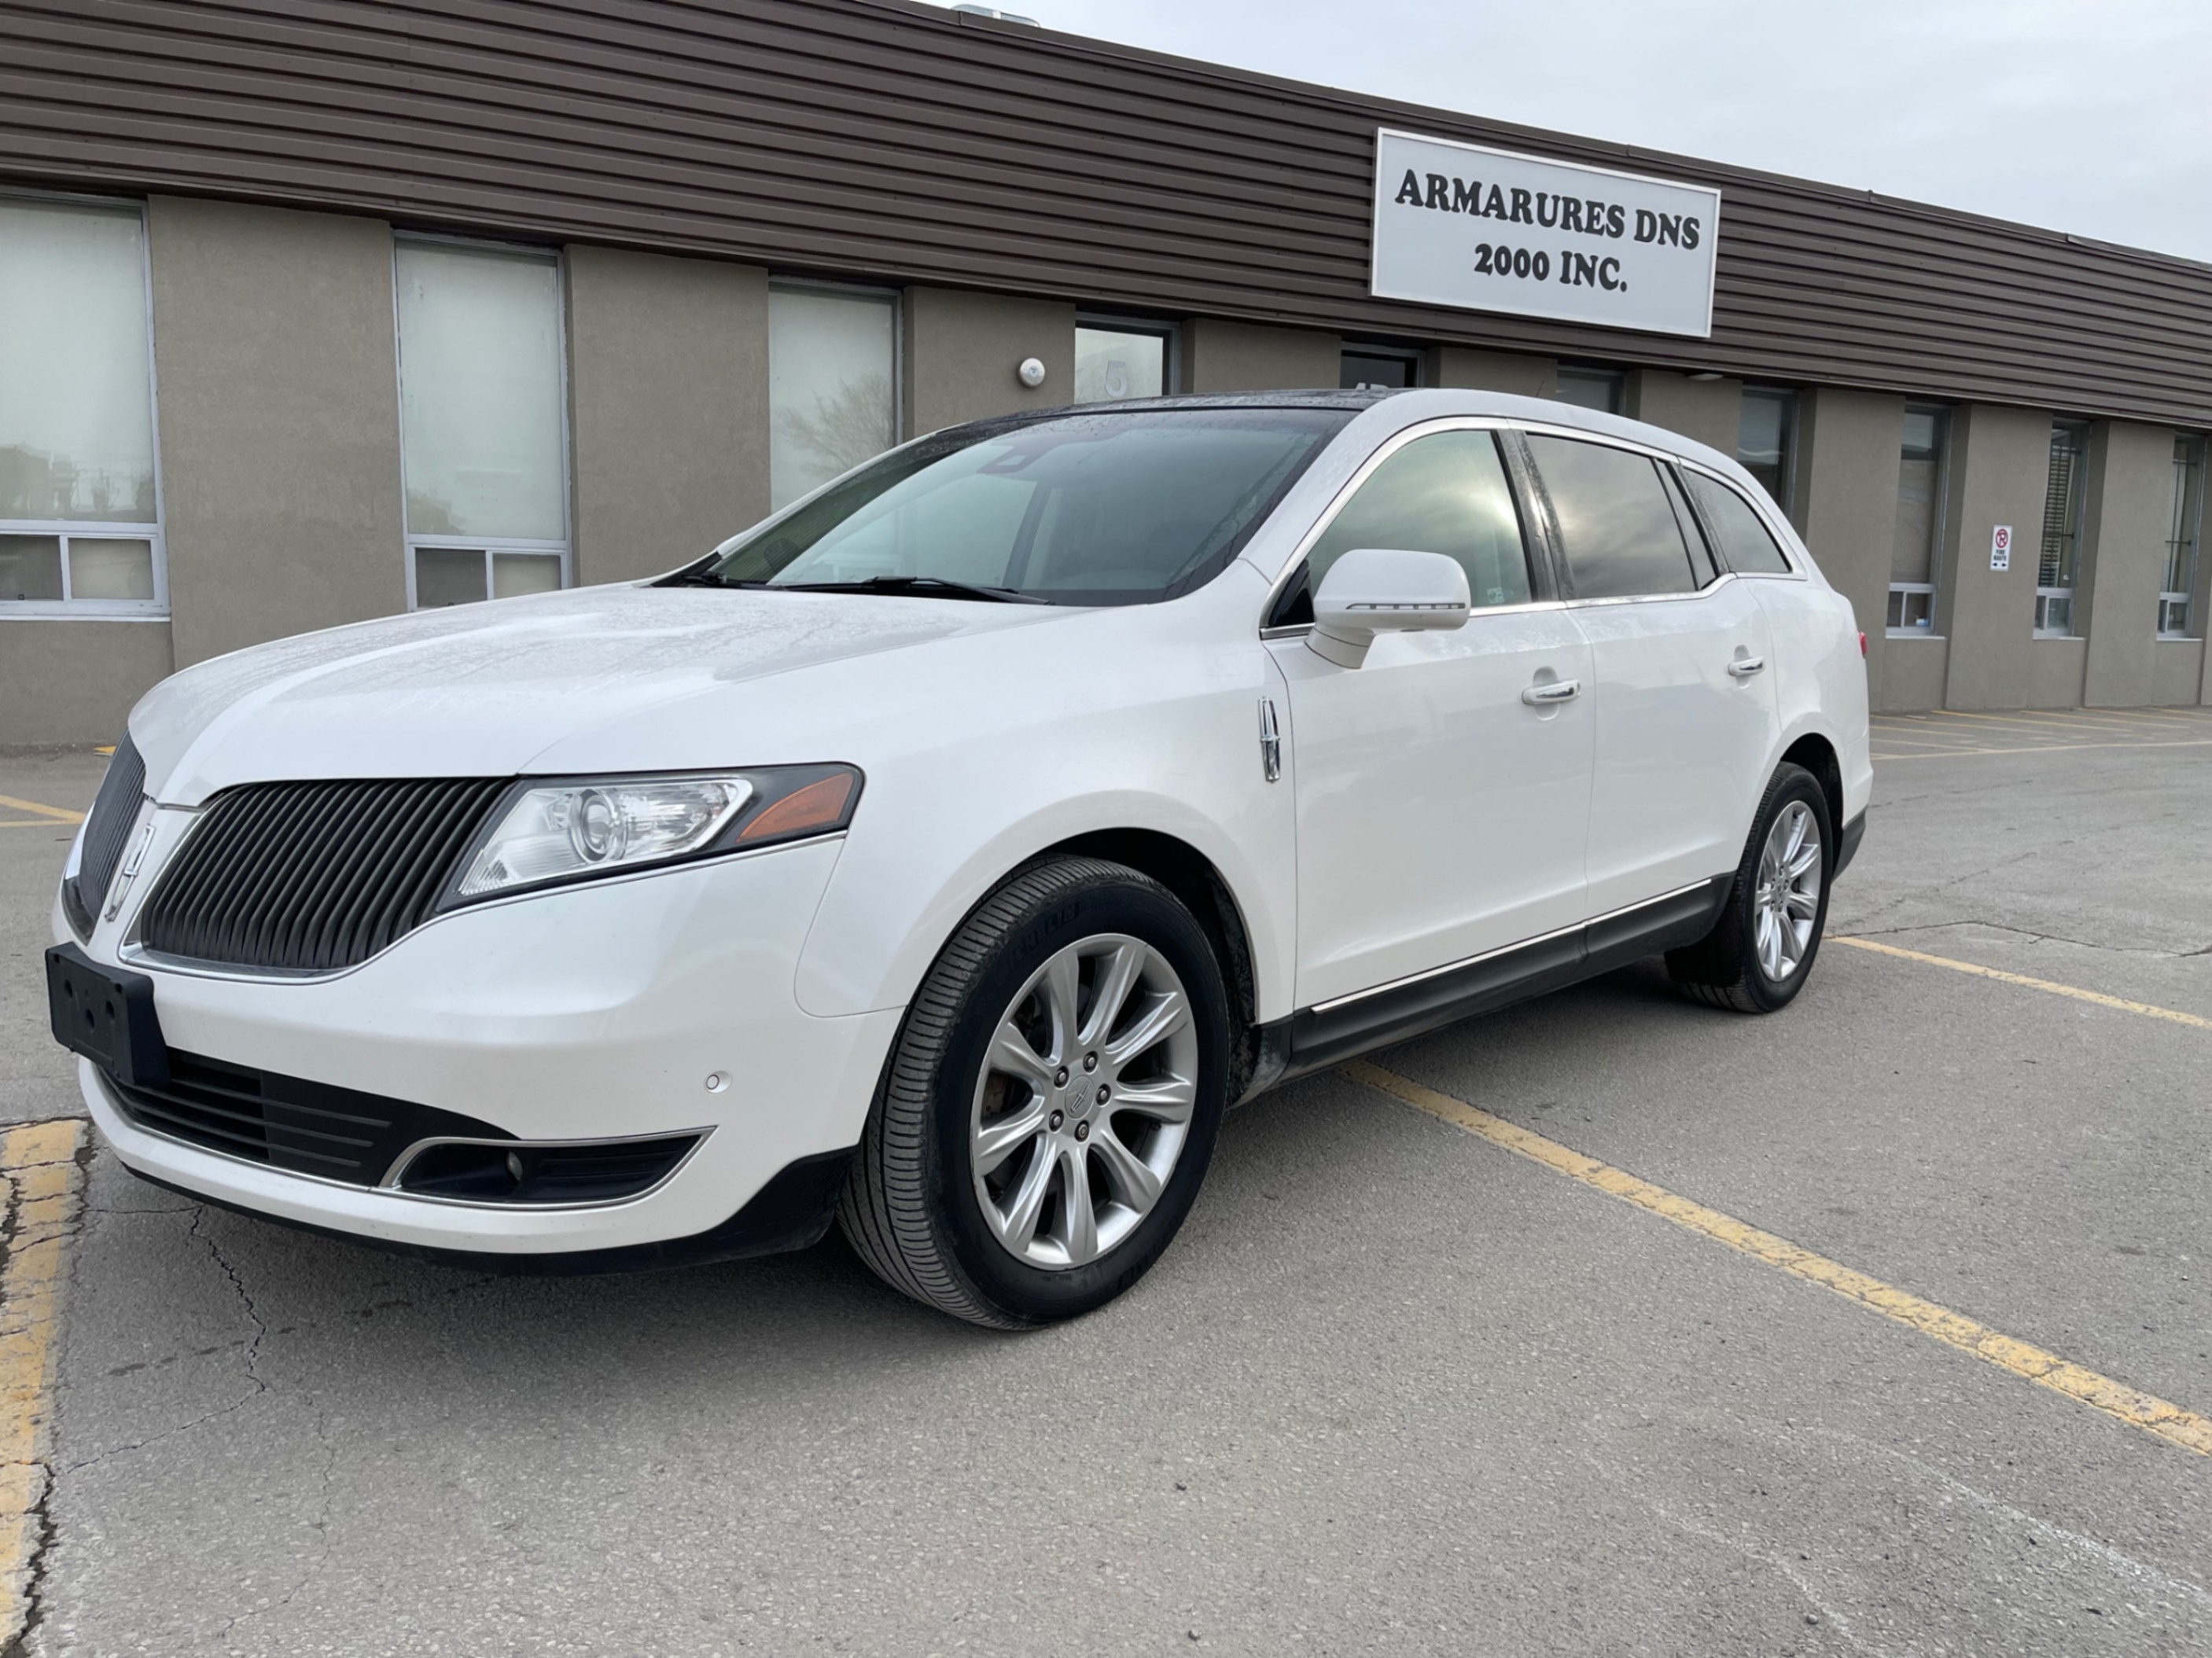 2014 Lincoln MKT EcoBoost AWD  Navigation/Leather/Pano Sunroof/Came